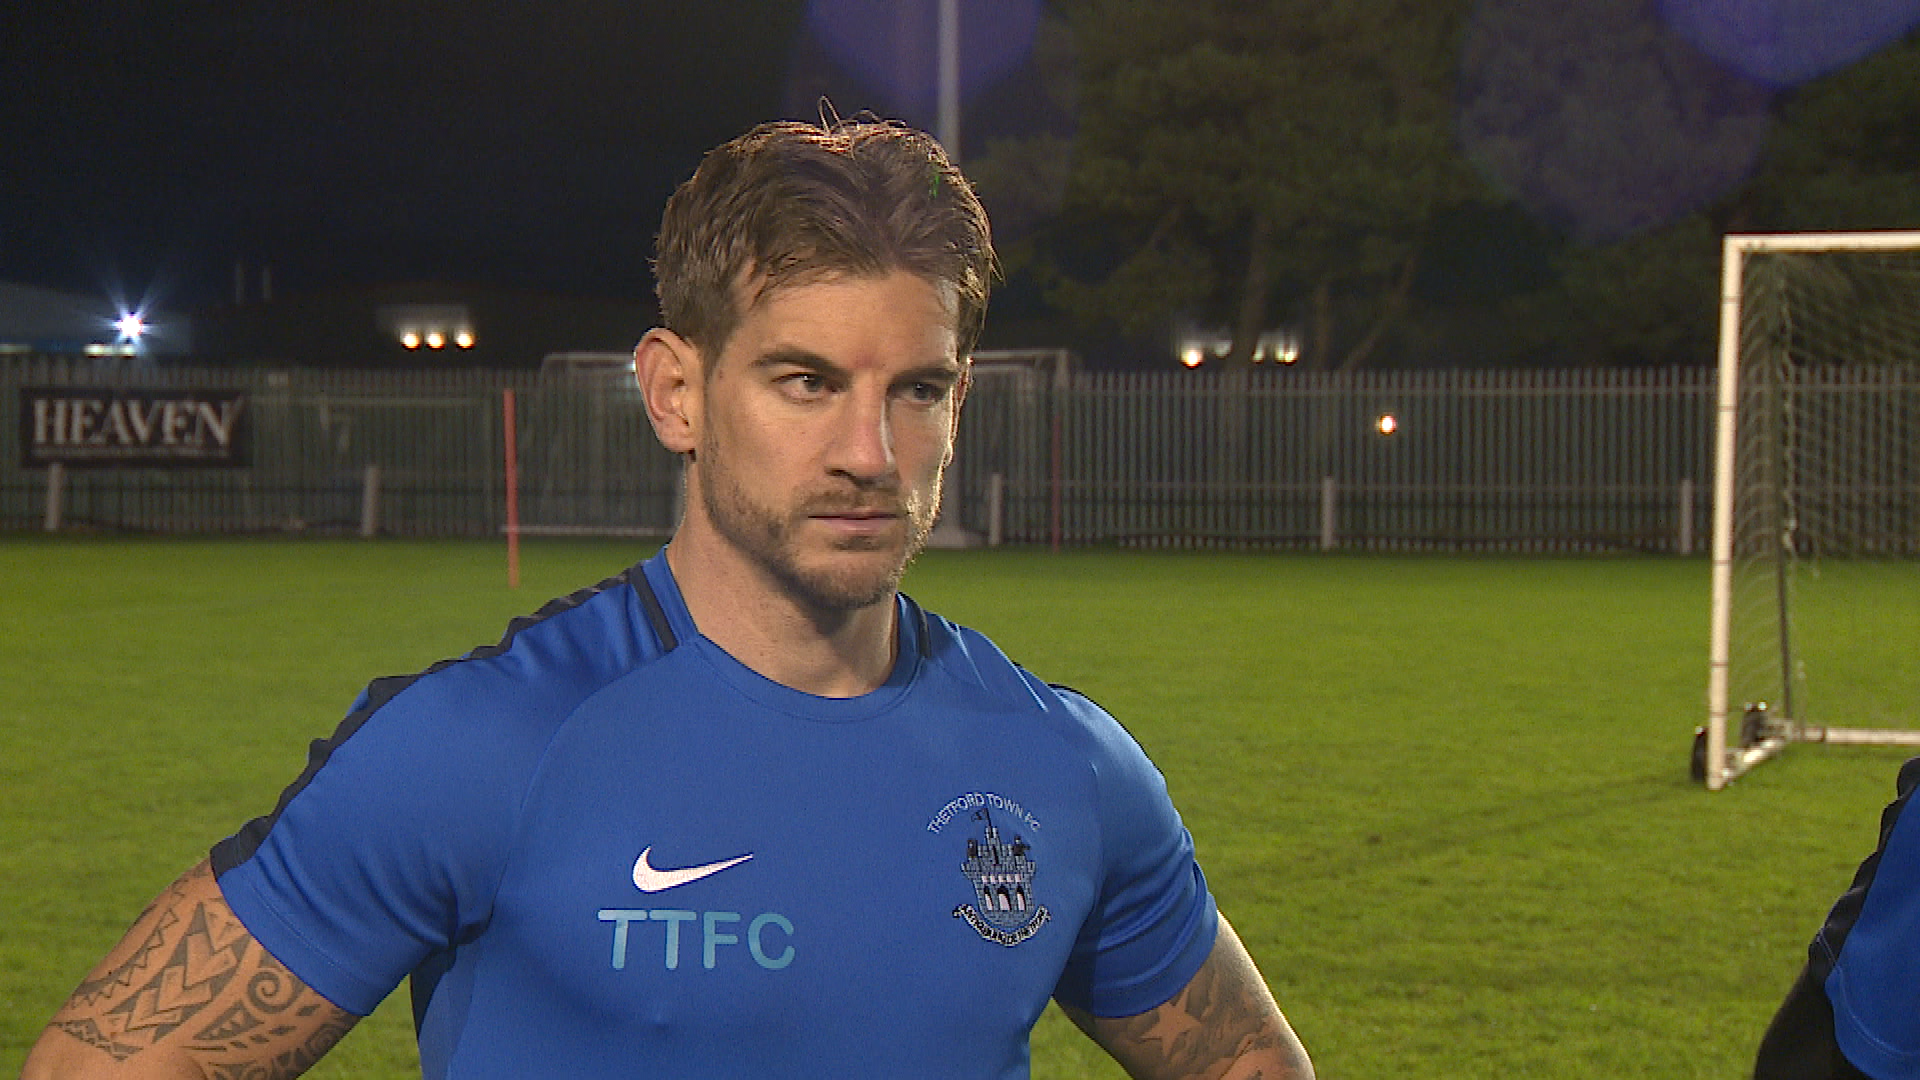 Thetford Town's Matt Morton on being an openly gay player-manager in  non-league football | Anglia | ITV News